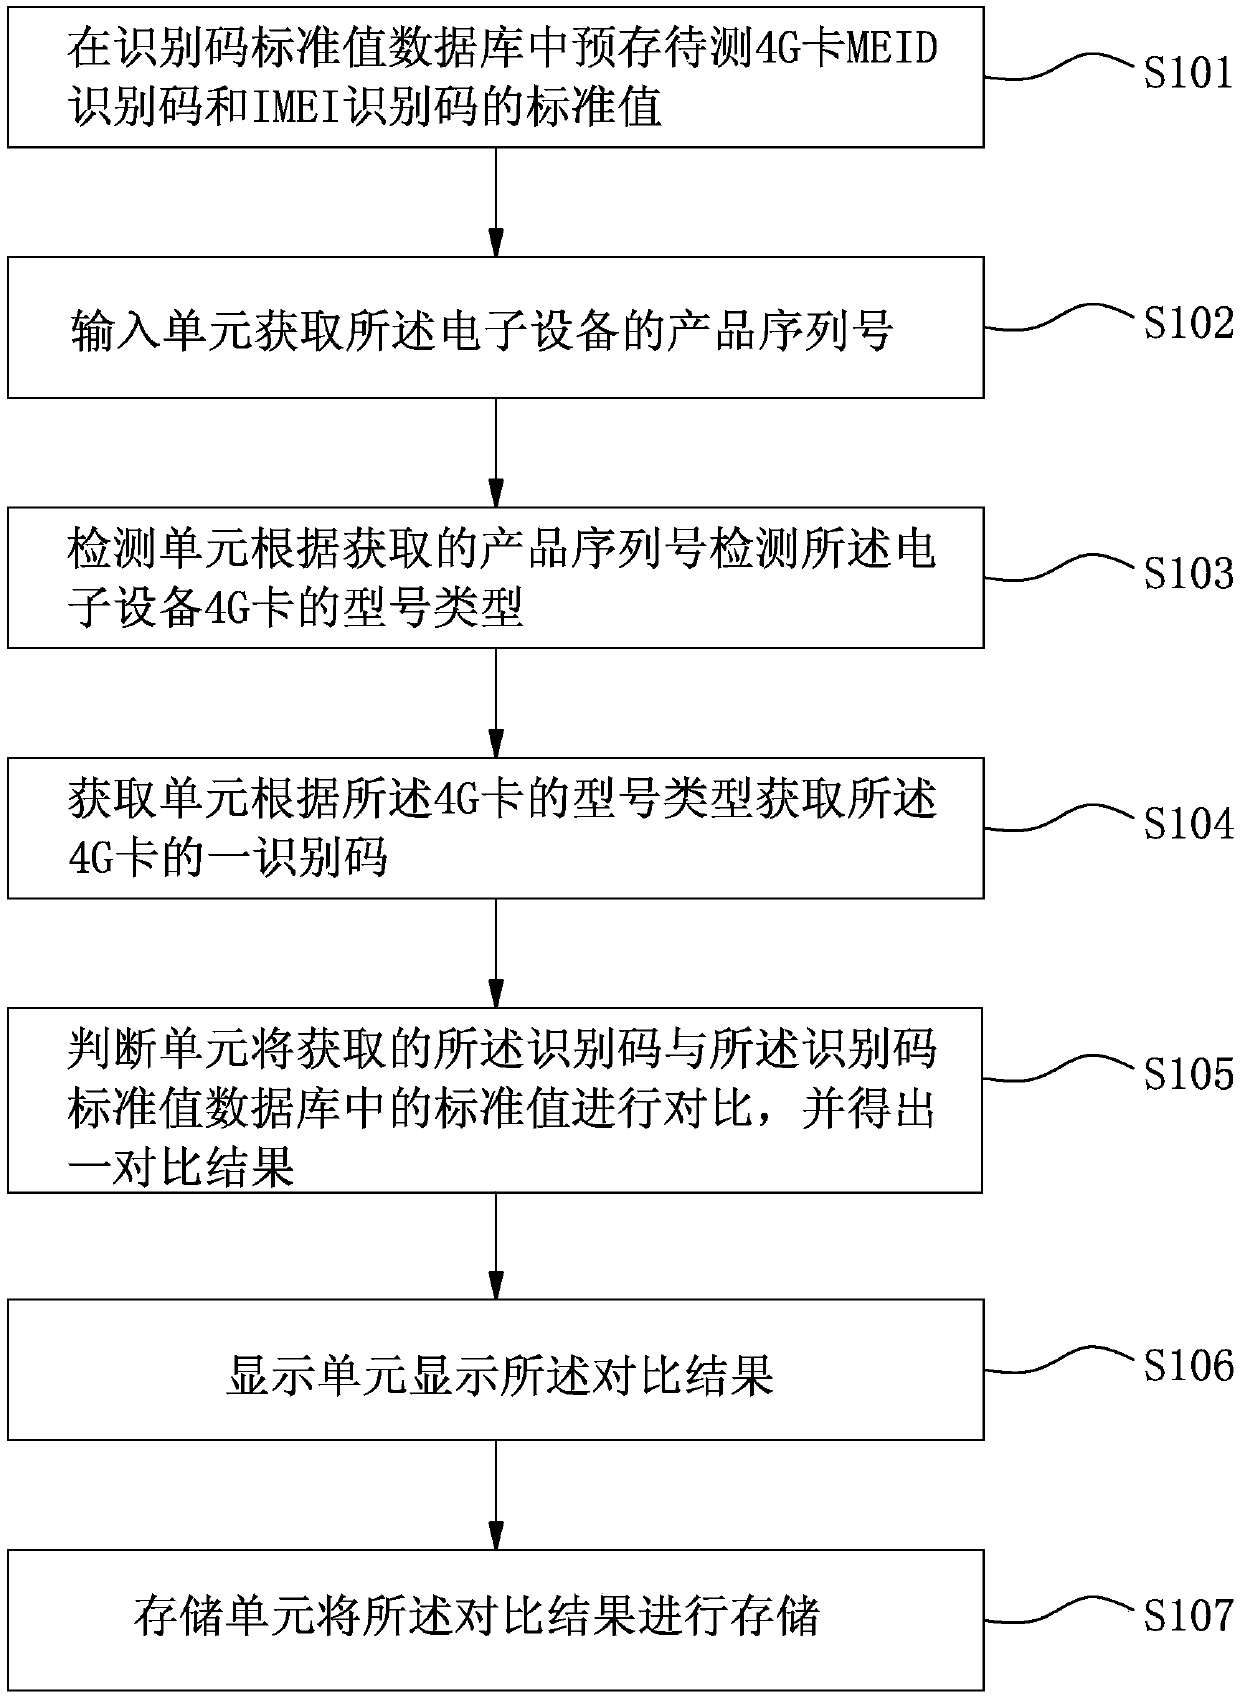 Identification code automatic acquisition system and method